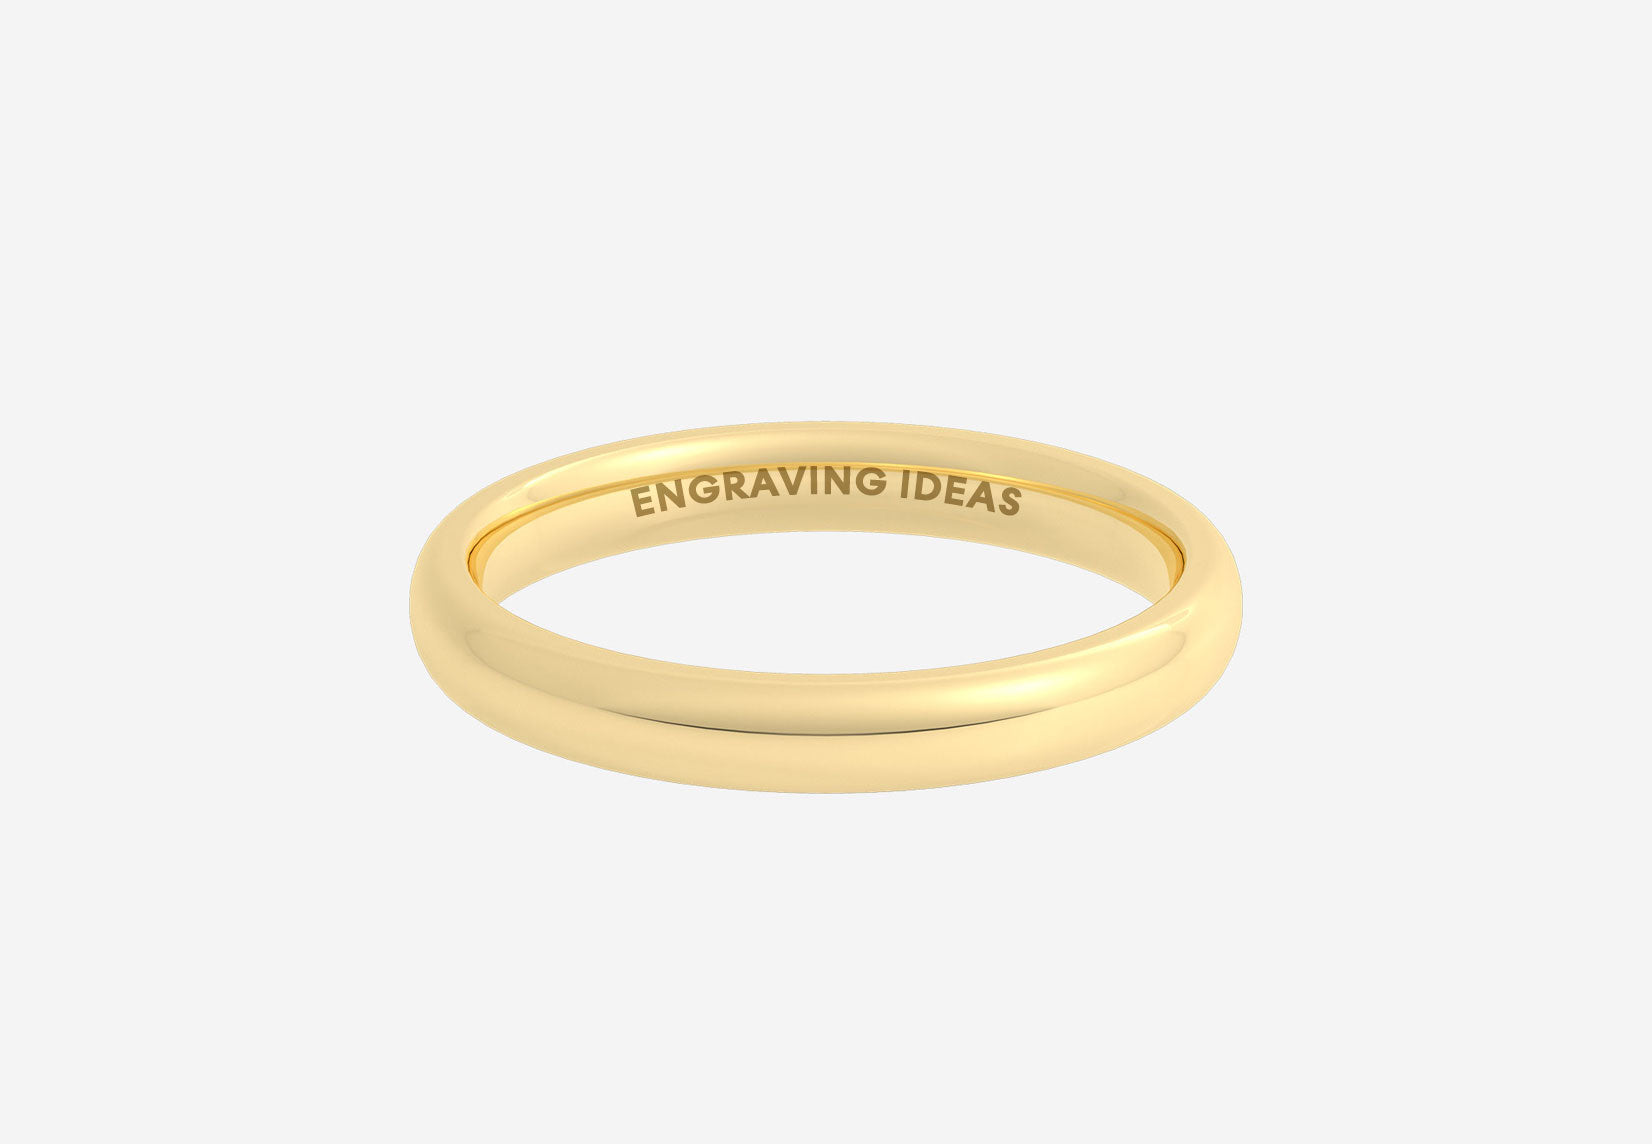 10 Wedding Ring Engraving Ideas To Get You Inspired | vlr.eng.br